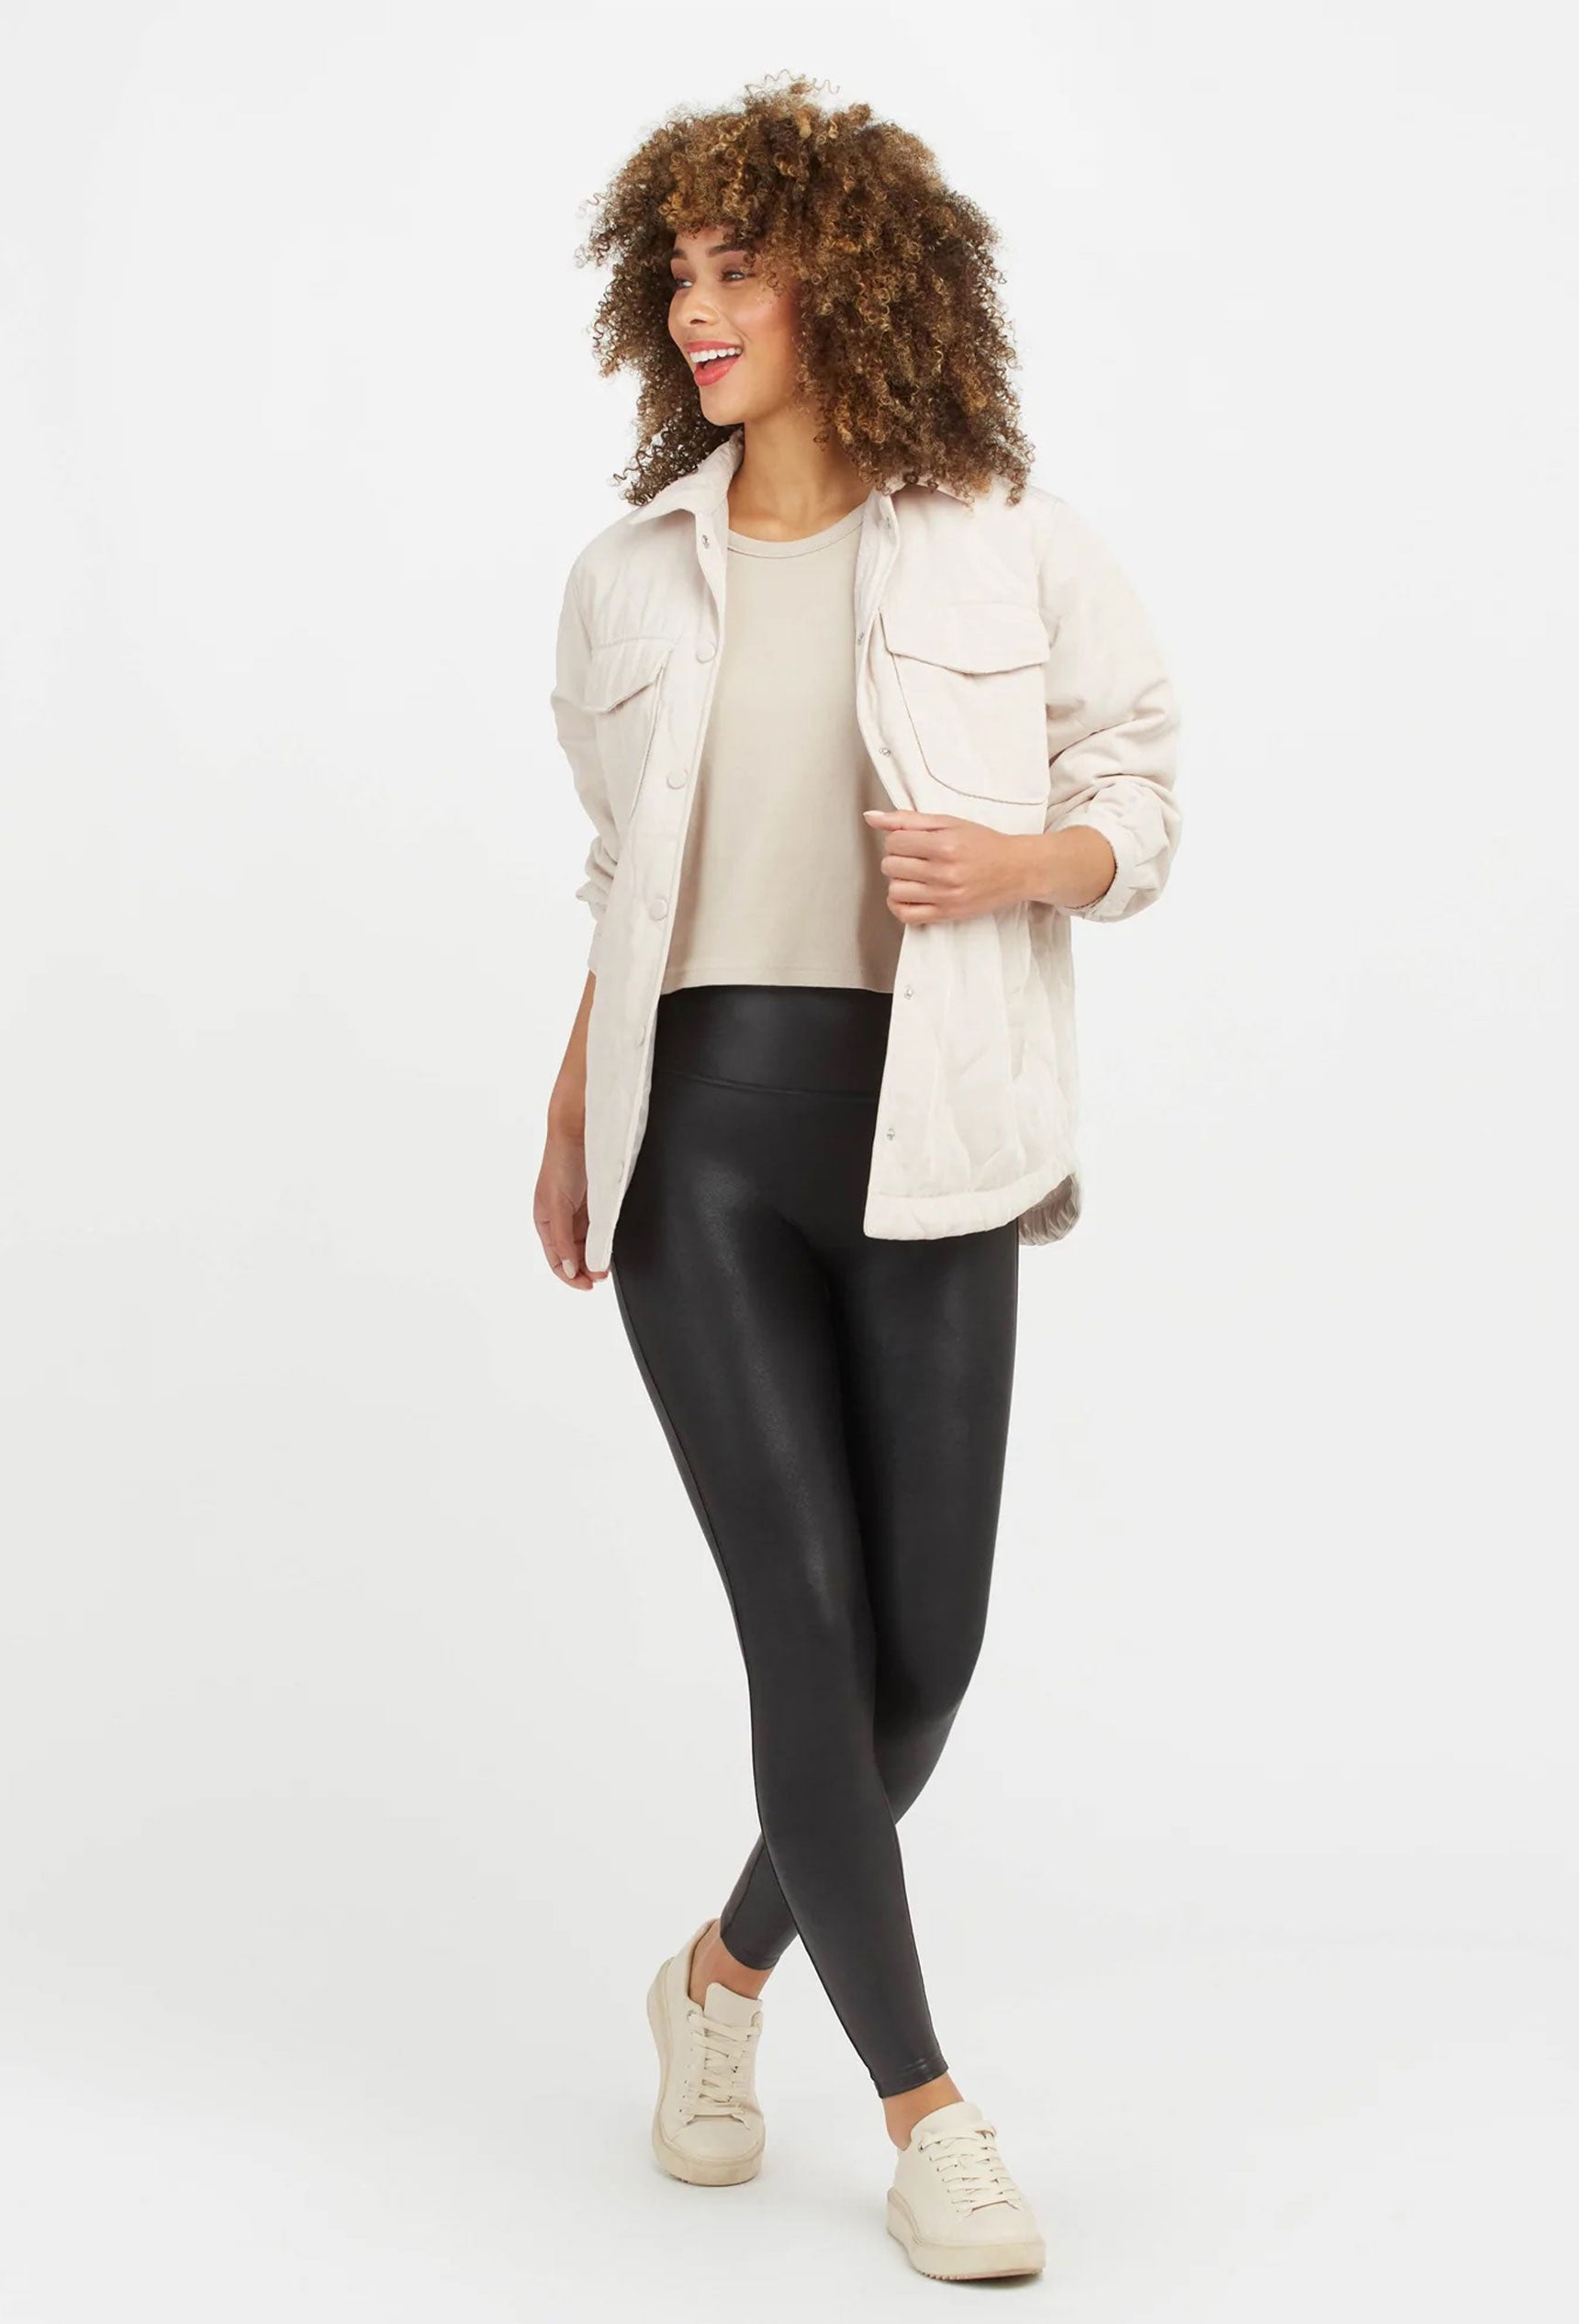 As Is Spanx Cropped Flare Ponte Pant Regular 